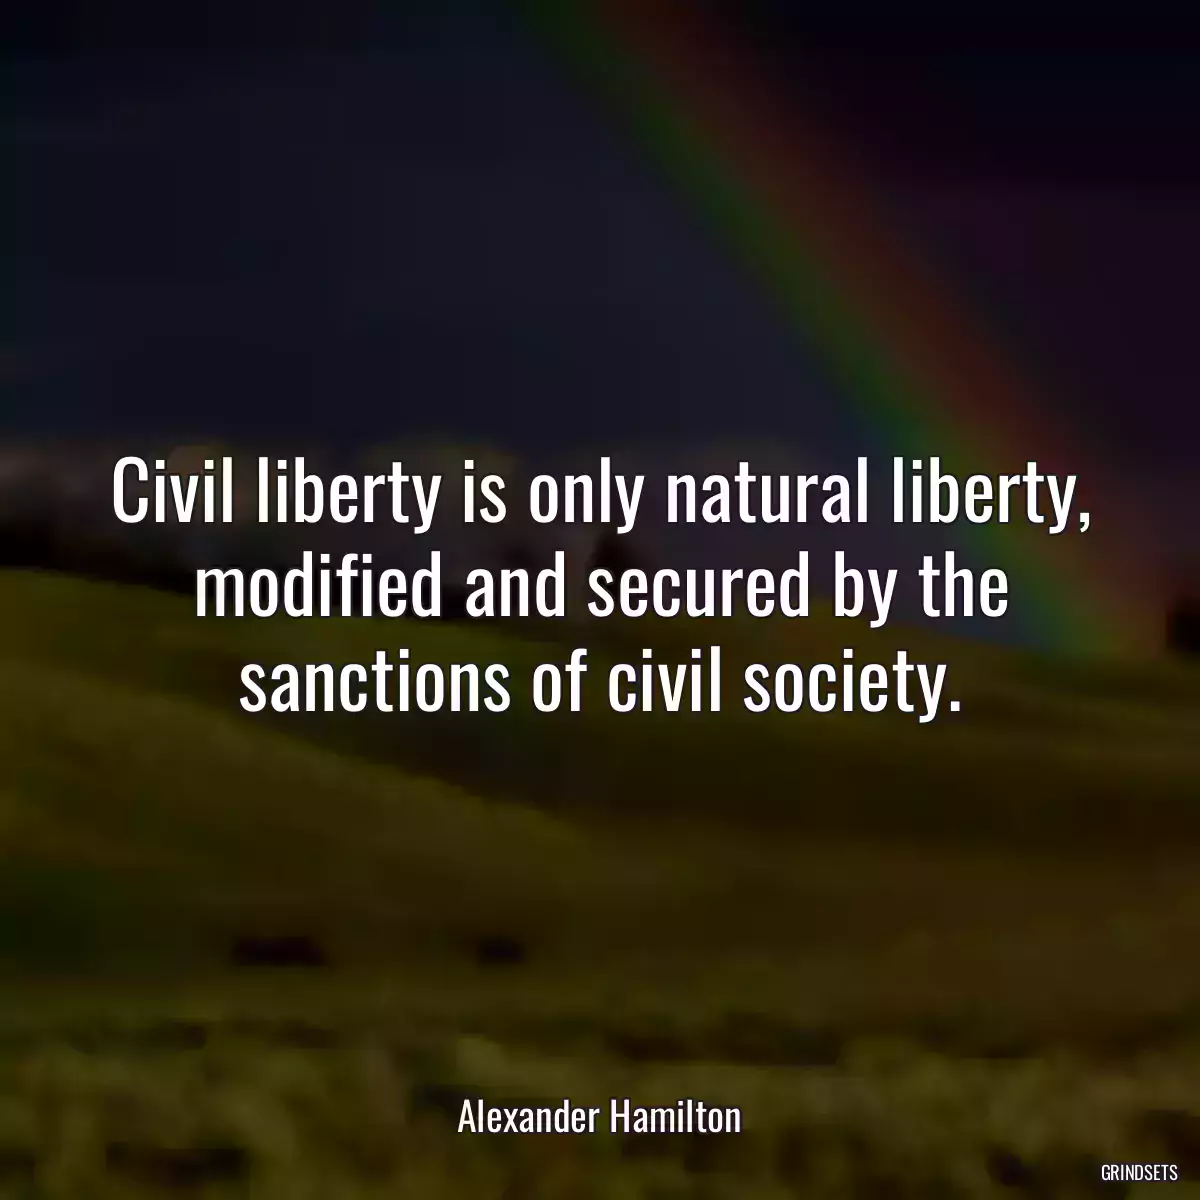 Civil liberty is only natural liberty, modified and secured by the sanctions of civil society.